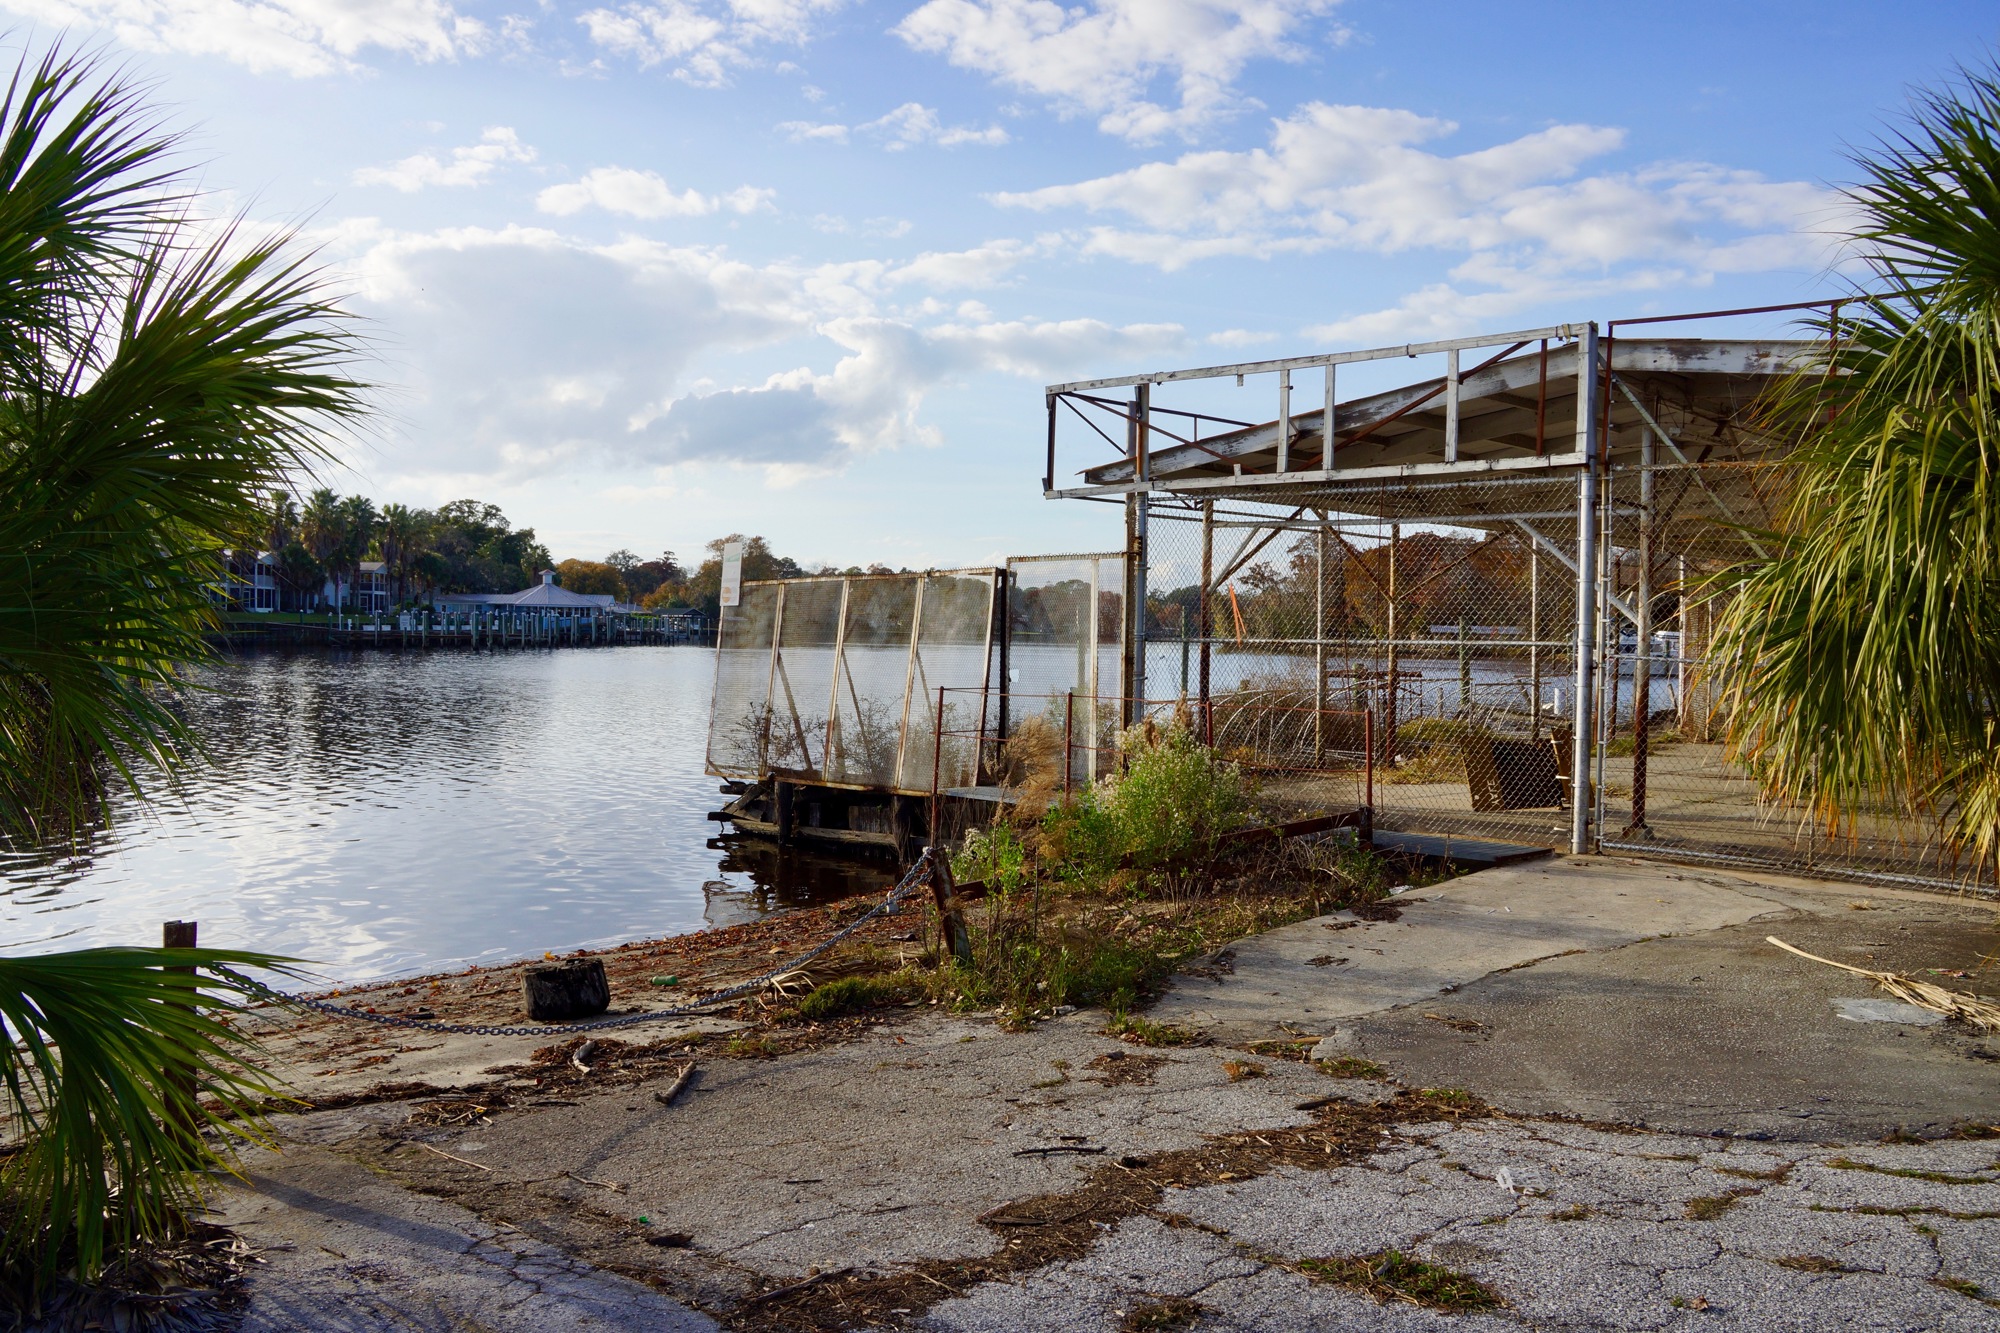 Plans include rebuilding the docks, allowing boats to return to the property.